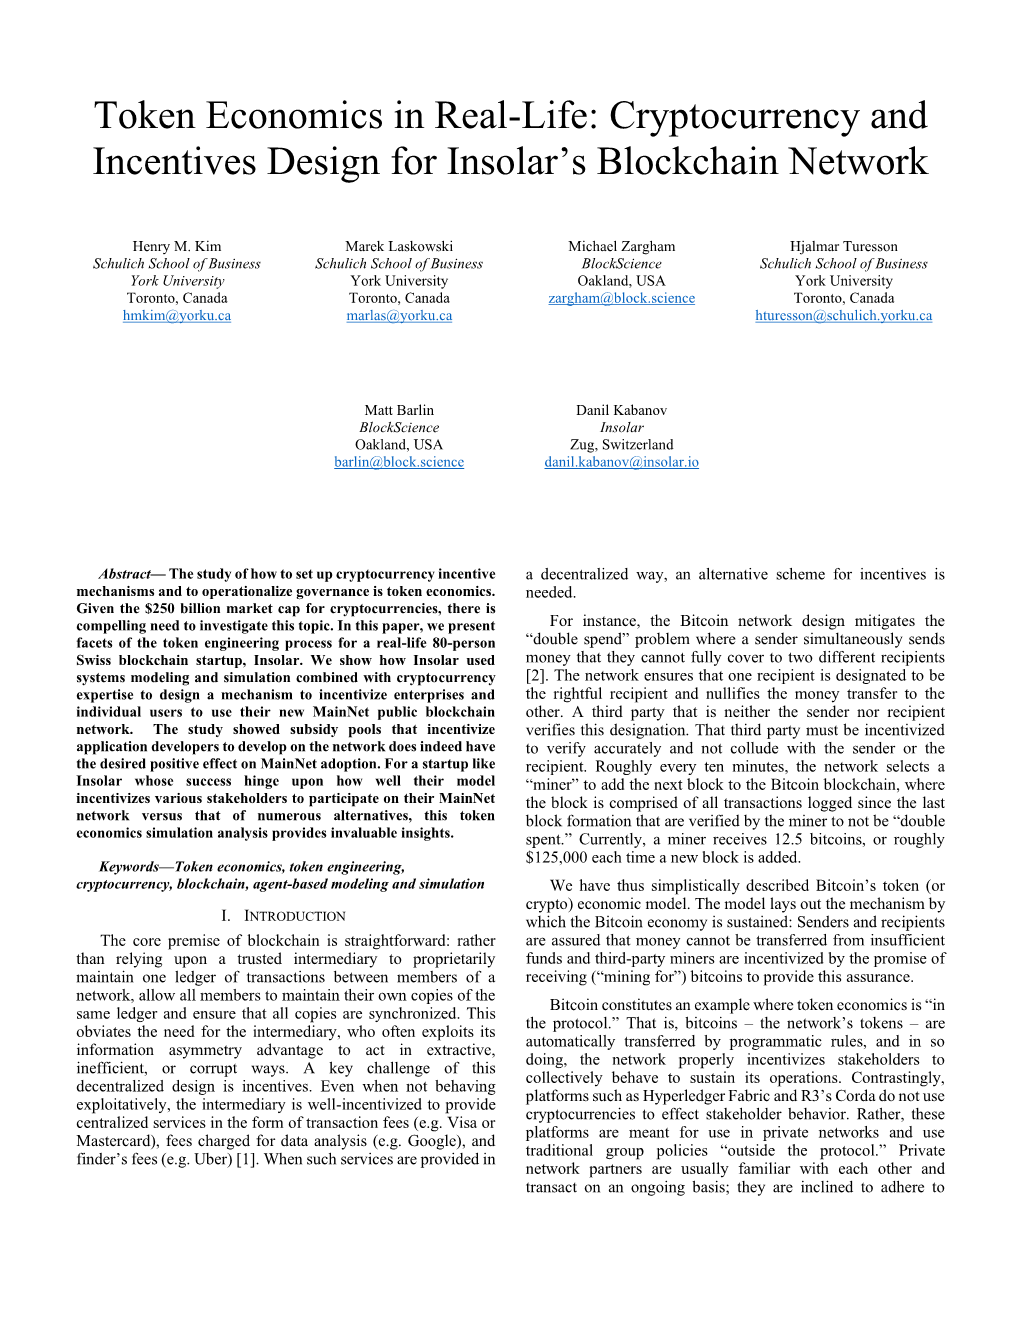 Token Economics in Real-Life: Cryptocurrency and Incentives Design for Insolar’S Blockchain Network